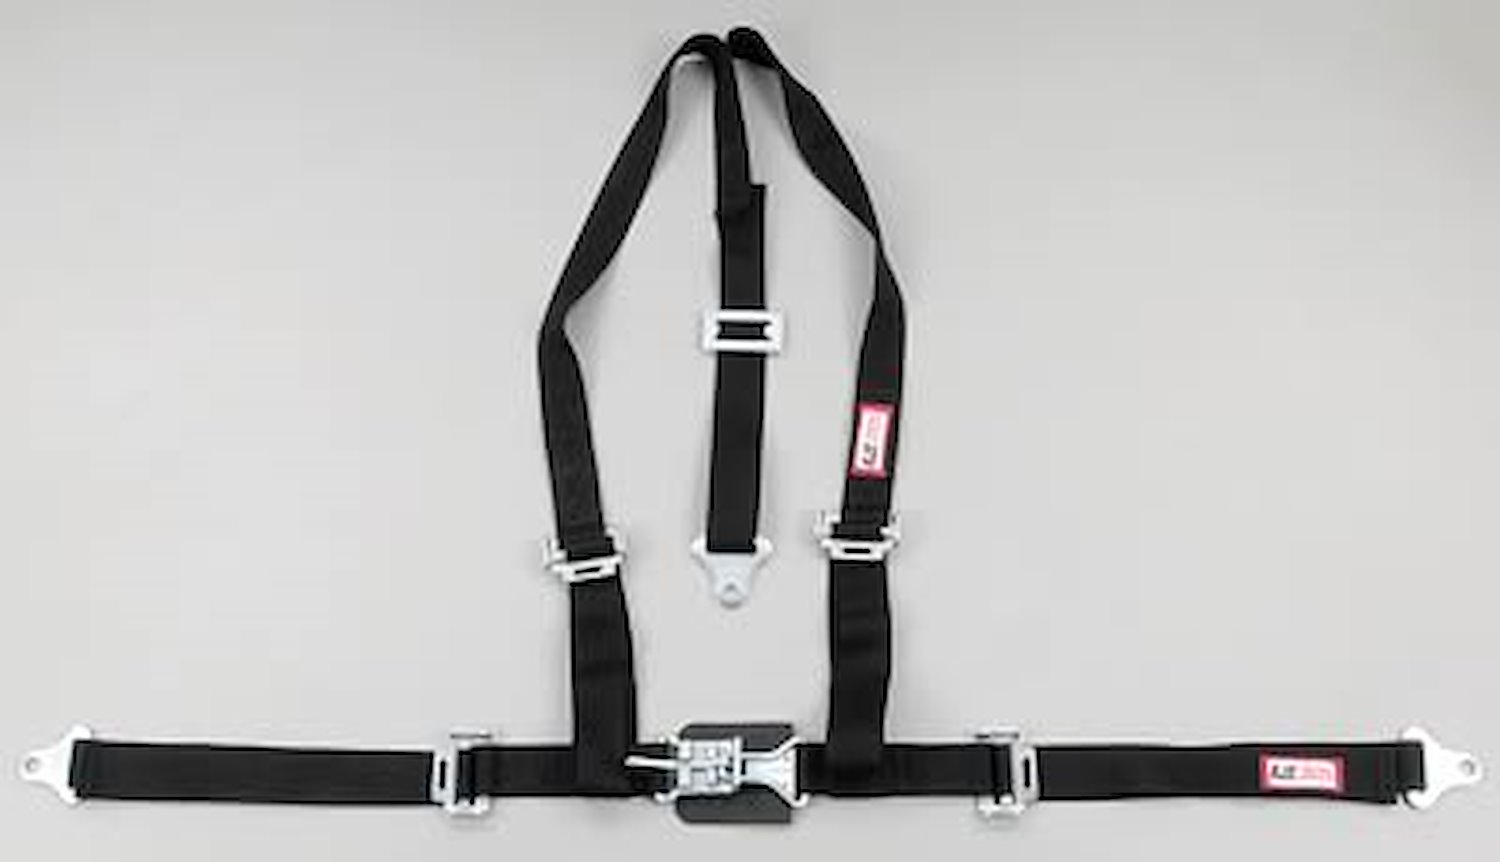 NON-SFI L&L HARNESS 3 PULL DOWN Lap Belt SNAP SEWN IN 2 S.H. Individual FLOOR Mount w/STERNUM STRAP WRAP/SNAP PURPLE